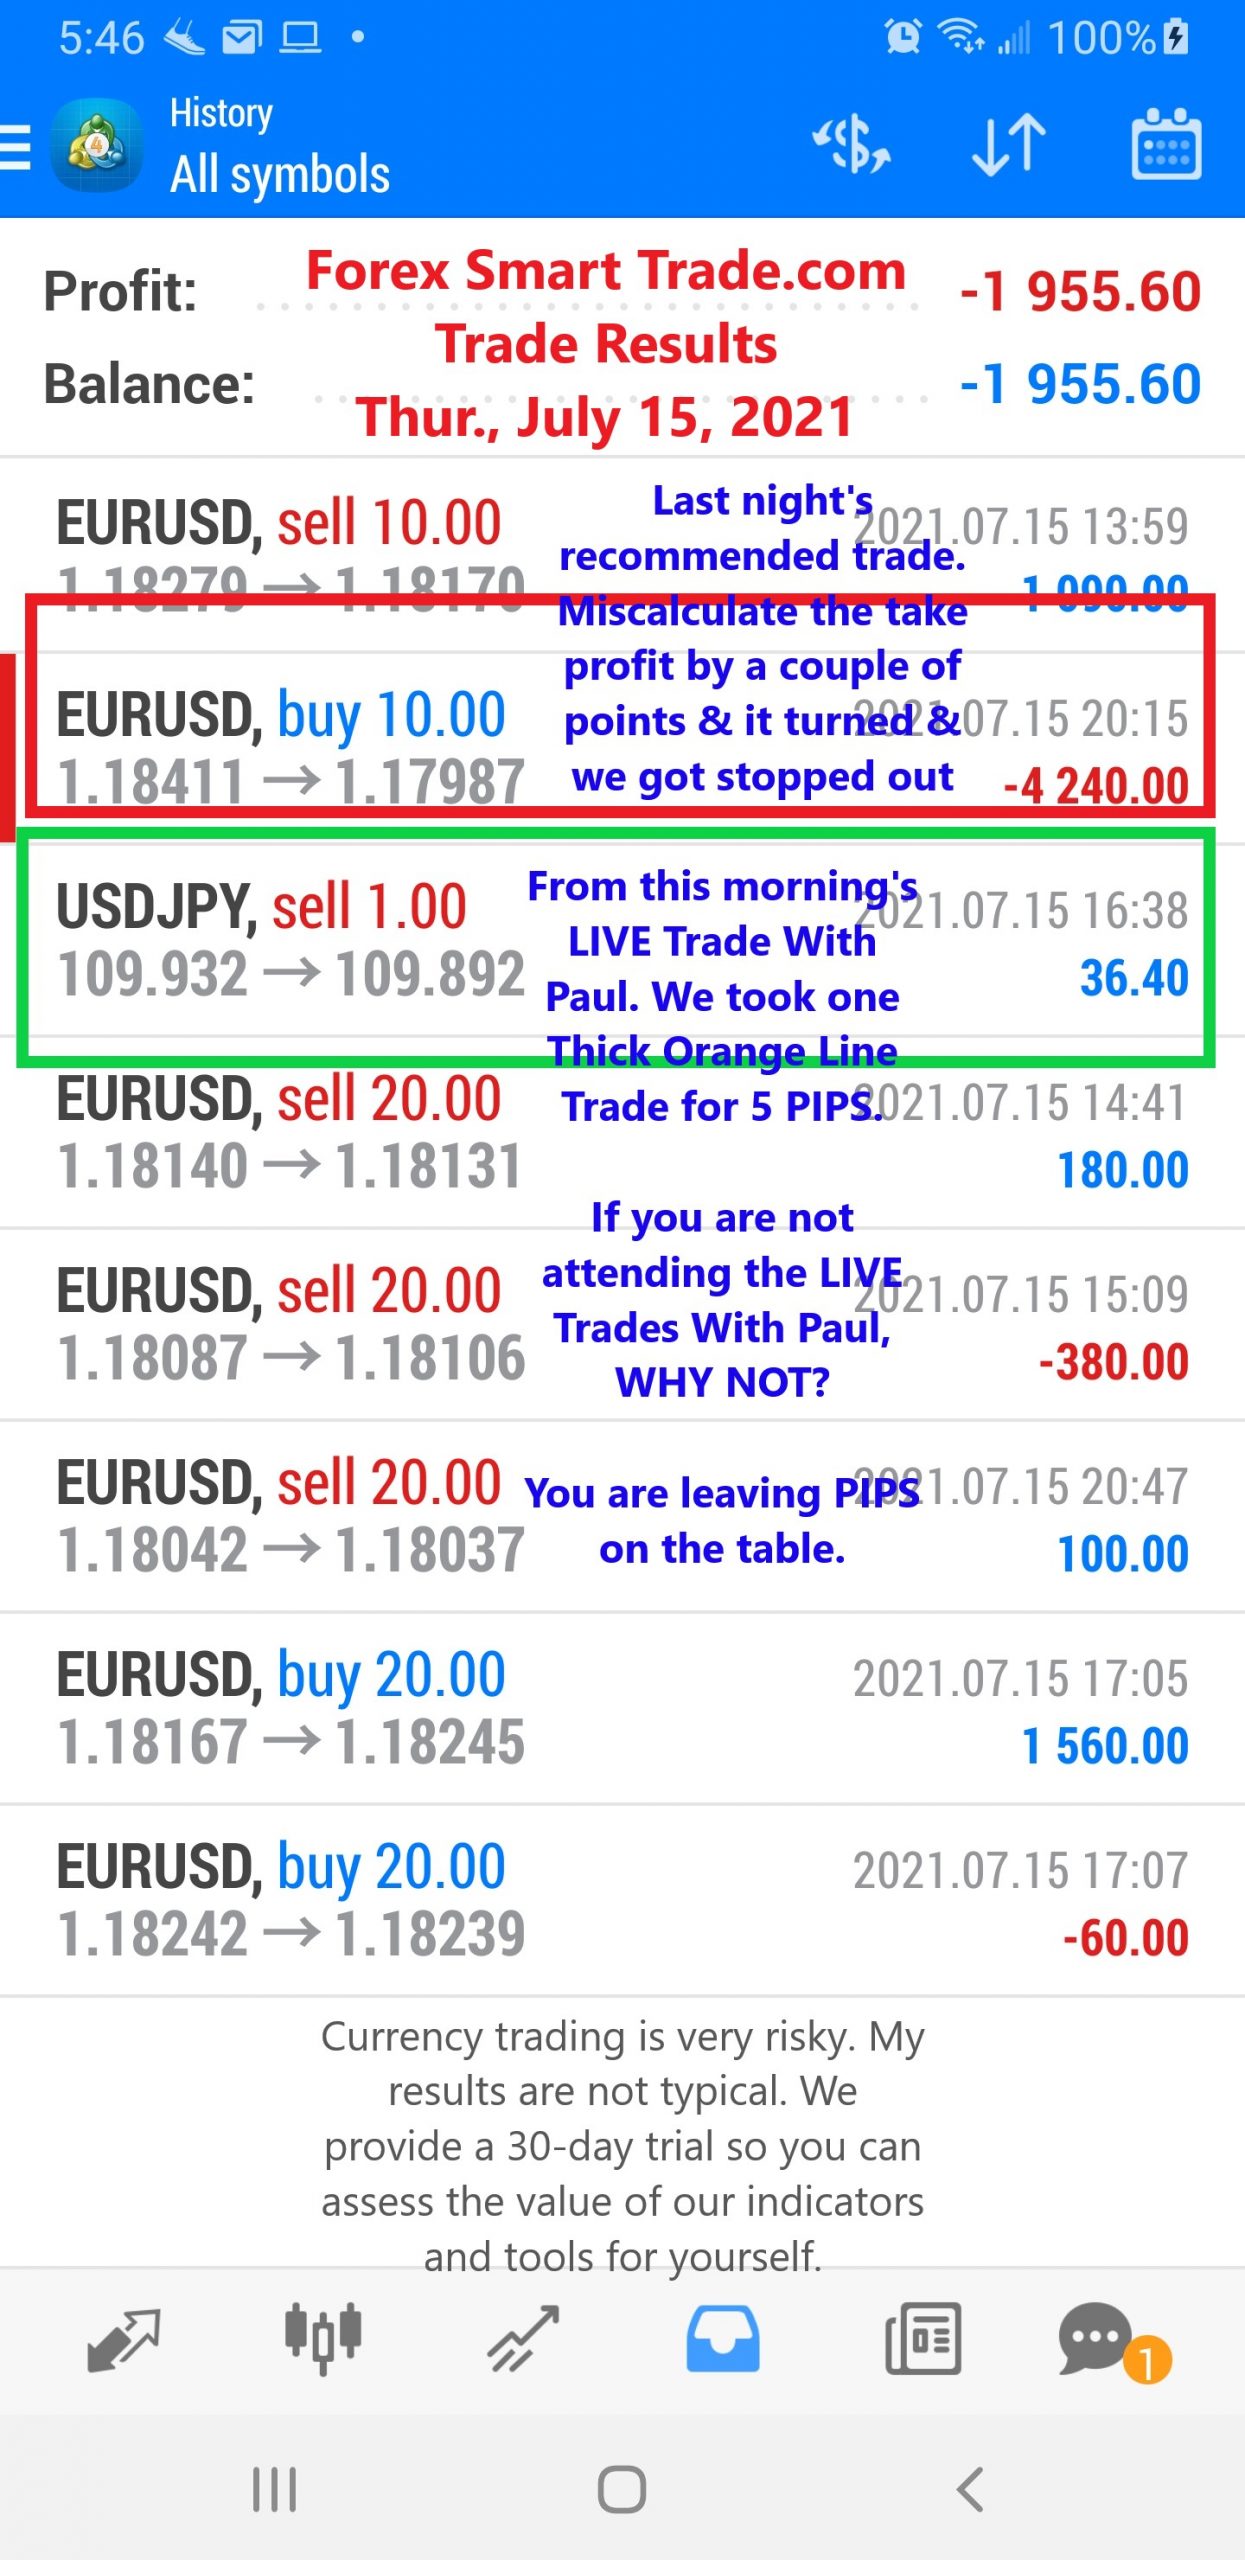 Daily Trade Results From Best Forex Currency Trading Course